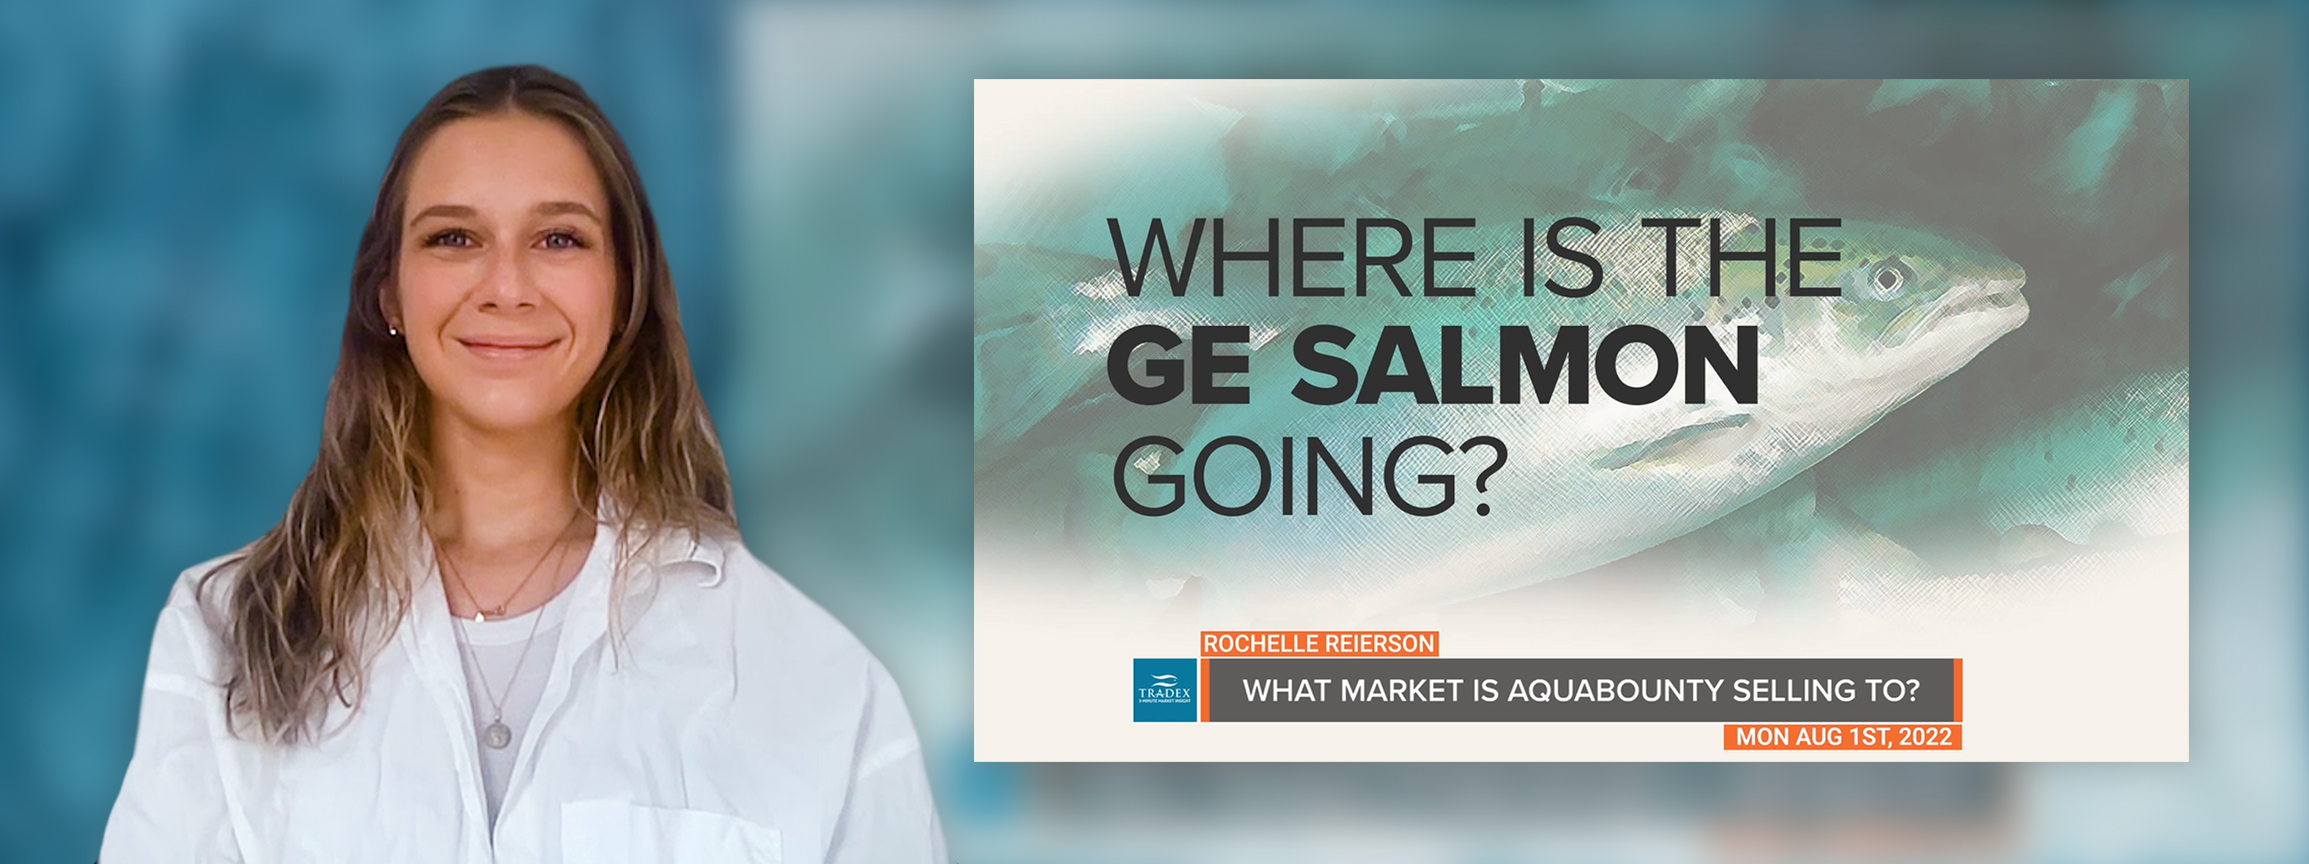 Where is Aquabounty Selling Their Genetically Modified Salmon?